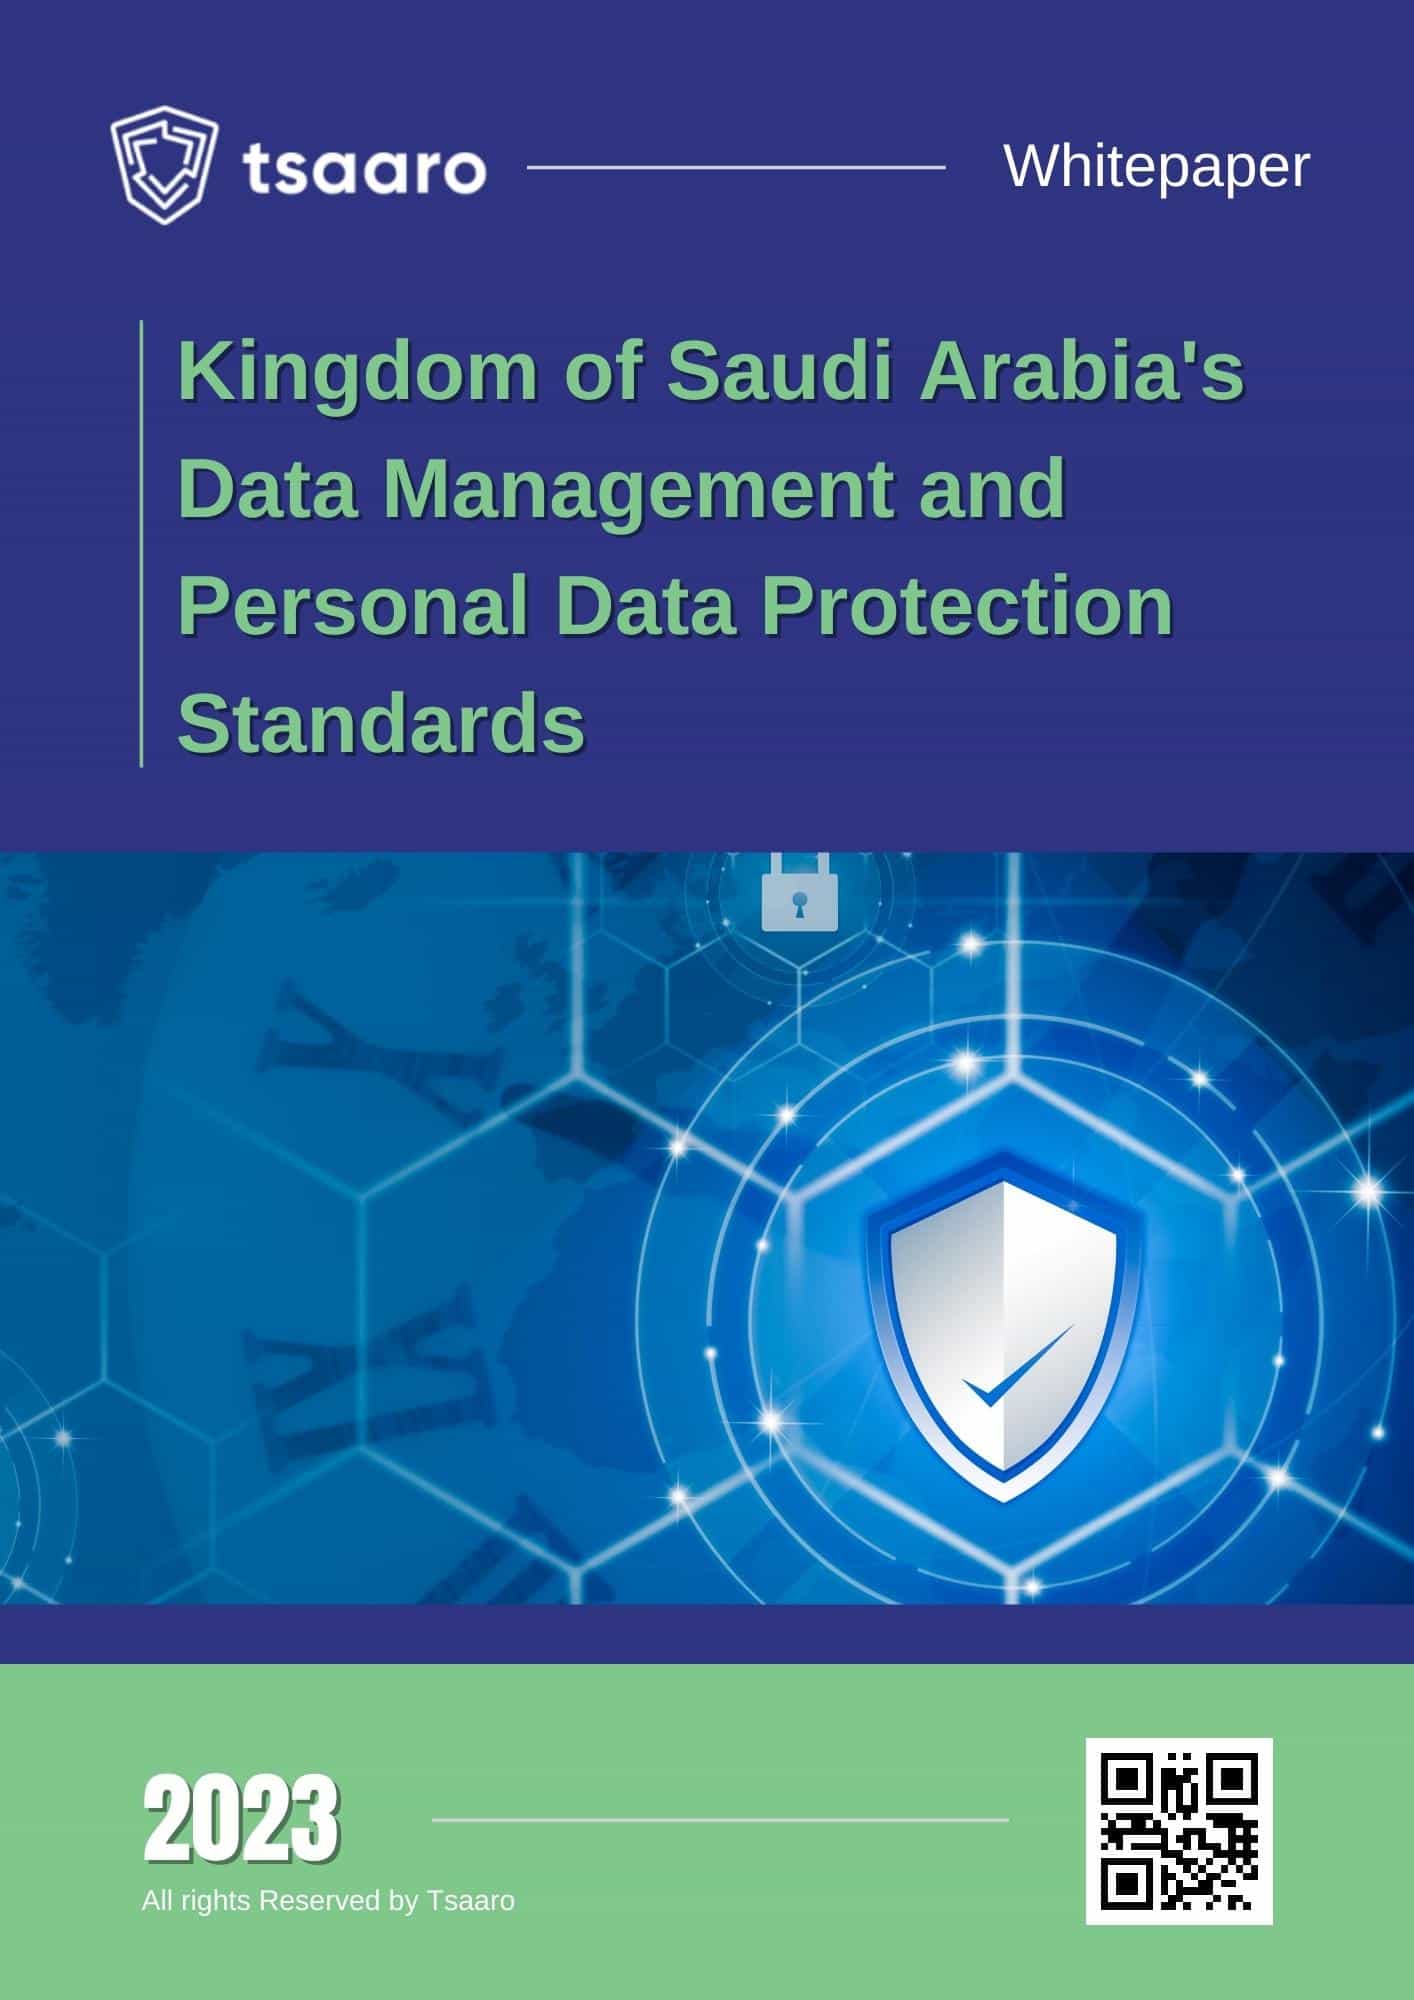 KSA's Data Management and Personal Data Protection Standards - Tsaaro